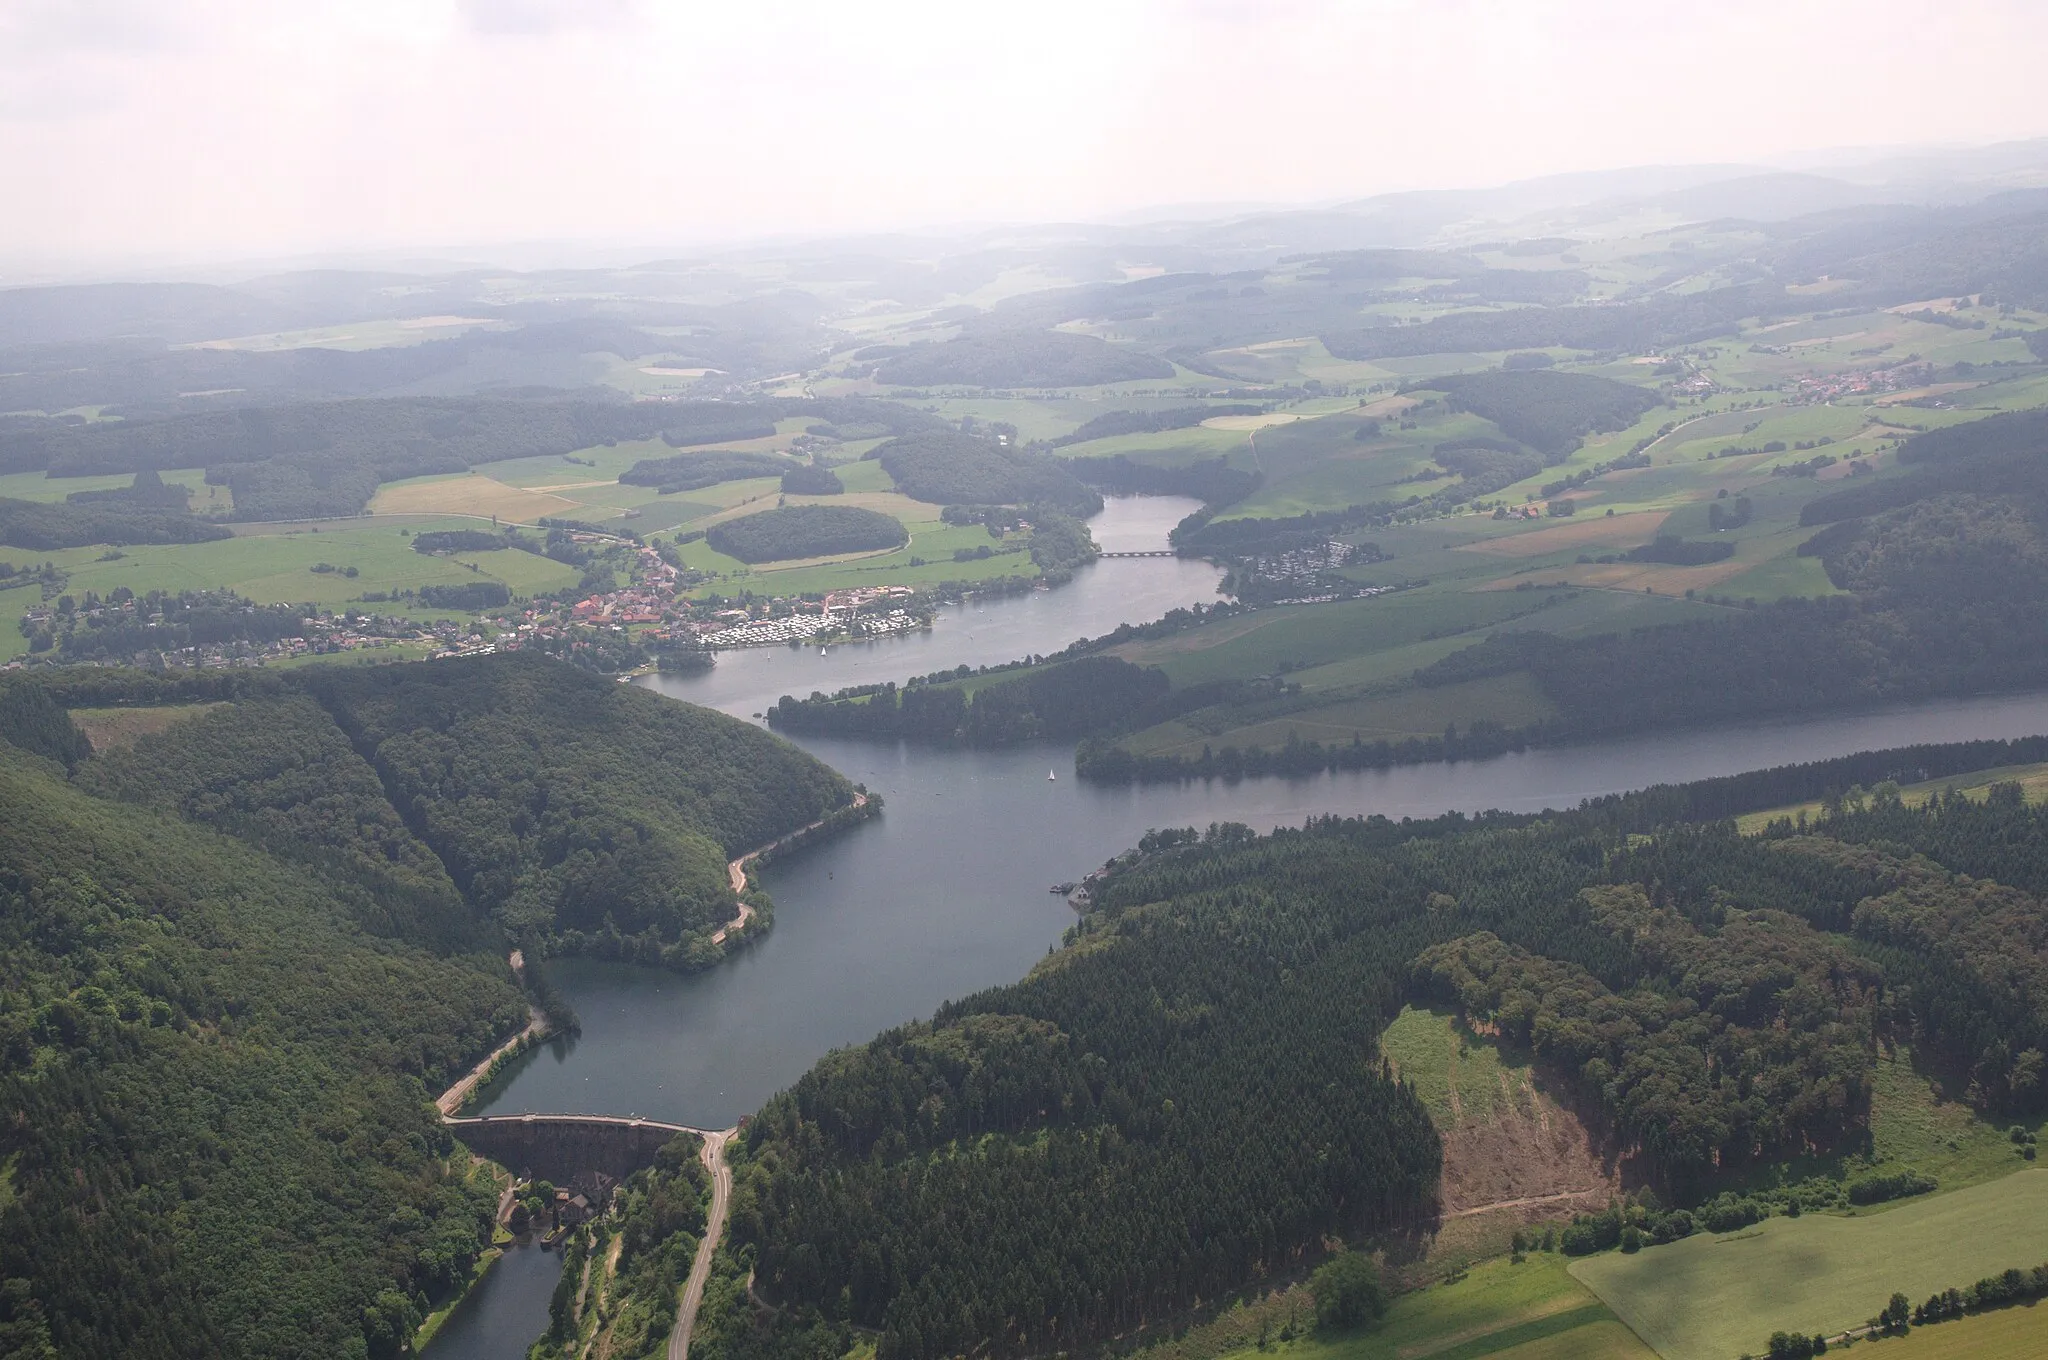 Photo showing: Fotoflug Sauerland-Ost: Diemelsee

The production, editing or release of this file was supported by the Community-Budget of Wikimedia Deutschland.
To see other files made with the support of Wikimedia Deutschland, please see the category Supported by Wikimedia Deutschland.
العربية ∙ বাংলা ∙ Deutsch ∙ English ∙ Esperanto ∙ français ∙ magyar ∙ Bahasa Indonesia ∙ italiano ∙ 日本語 ∙ македонски ∙ മലയാളം ∙ Bahasa Melayu ∙ Nederlands ∙ português ∙ русский ∙ svenska ∙ українська ∙ +/−